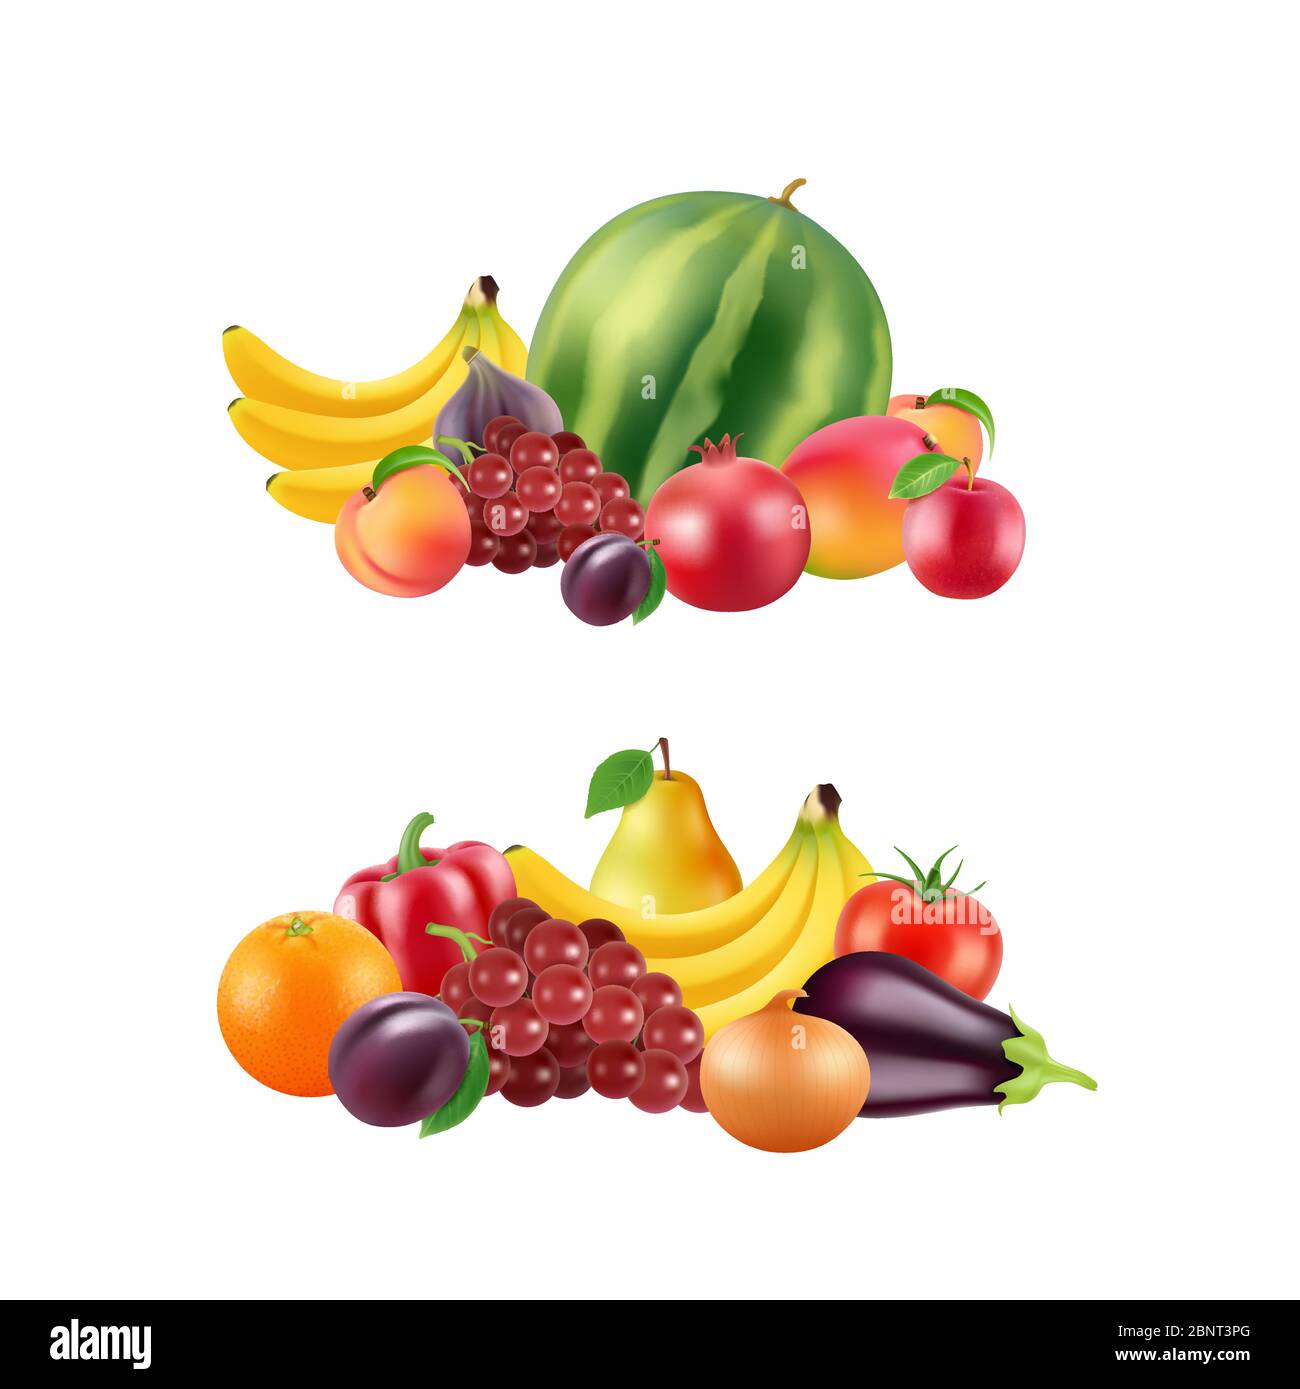 https://c8.alamy.com/comp/2BNT3PG/vector-realistic-fruits-and-berries-piles-set-isolated-on-white-background-illustration-2BNT3PG.jpg